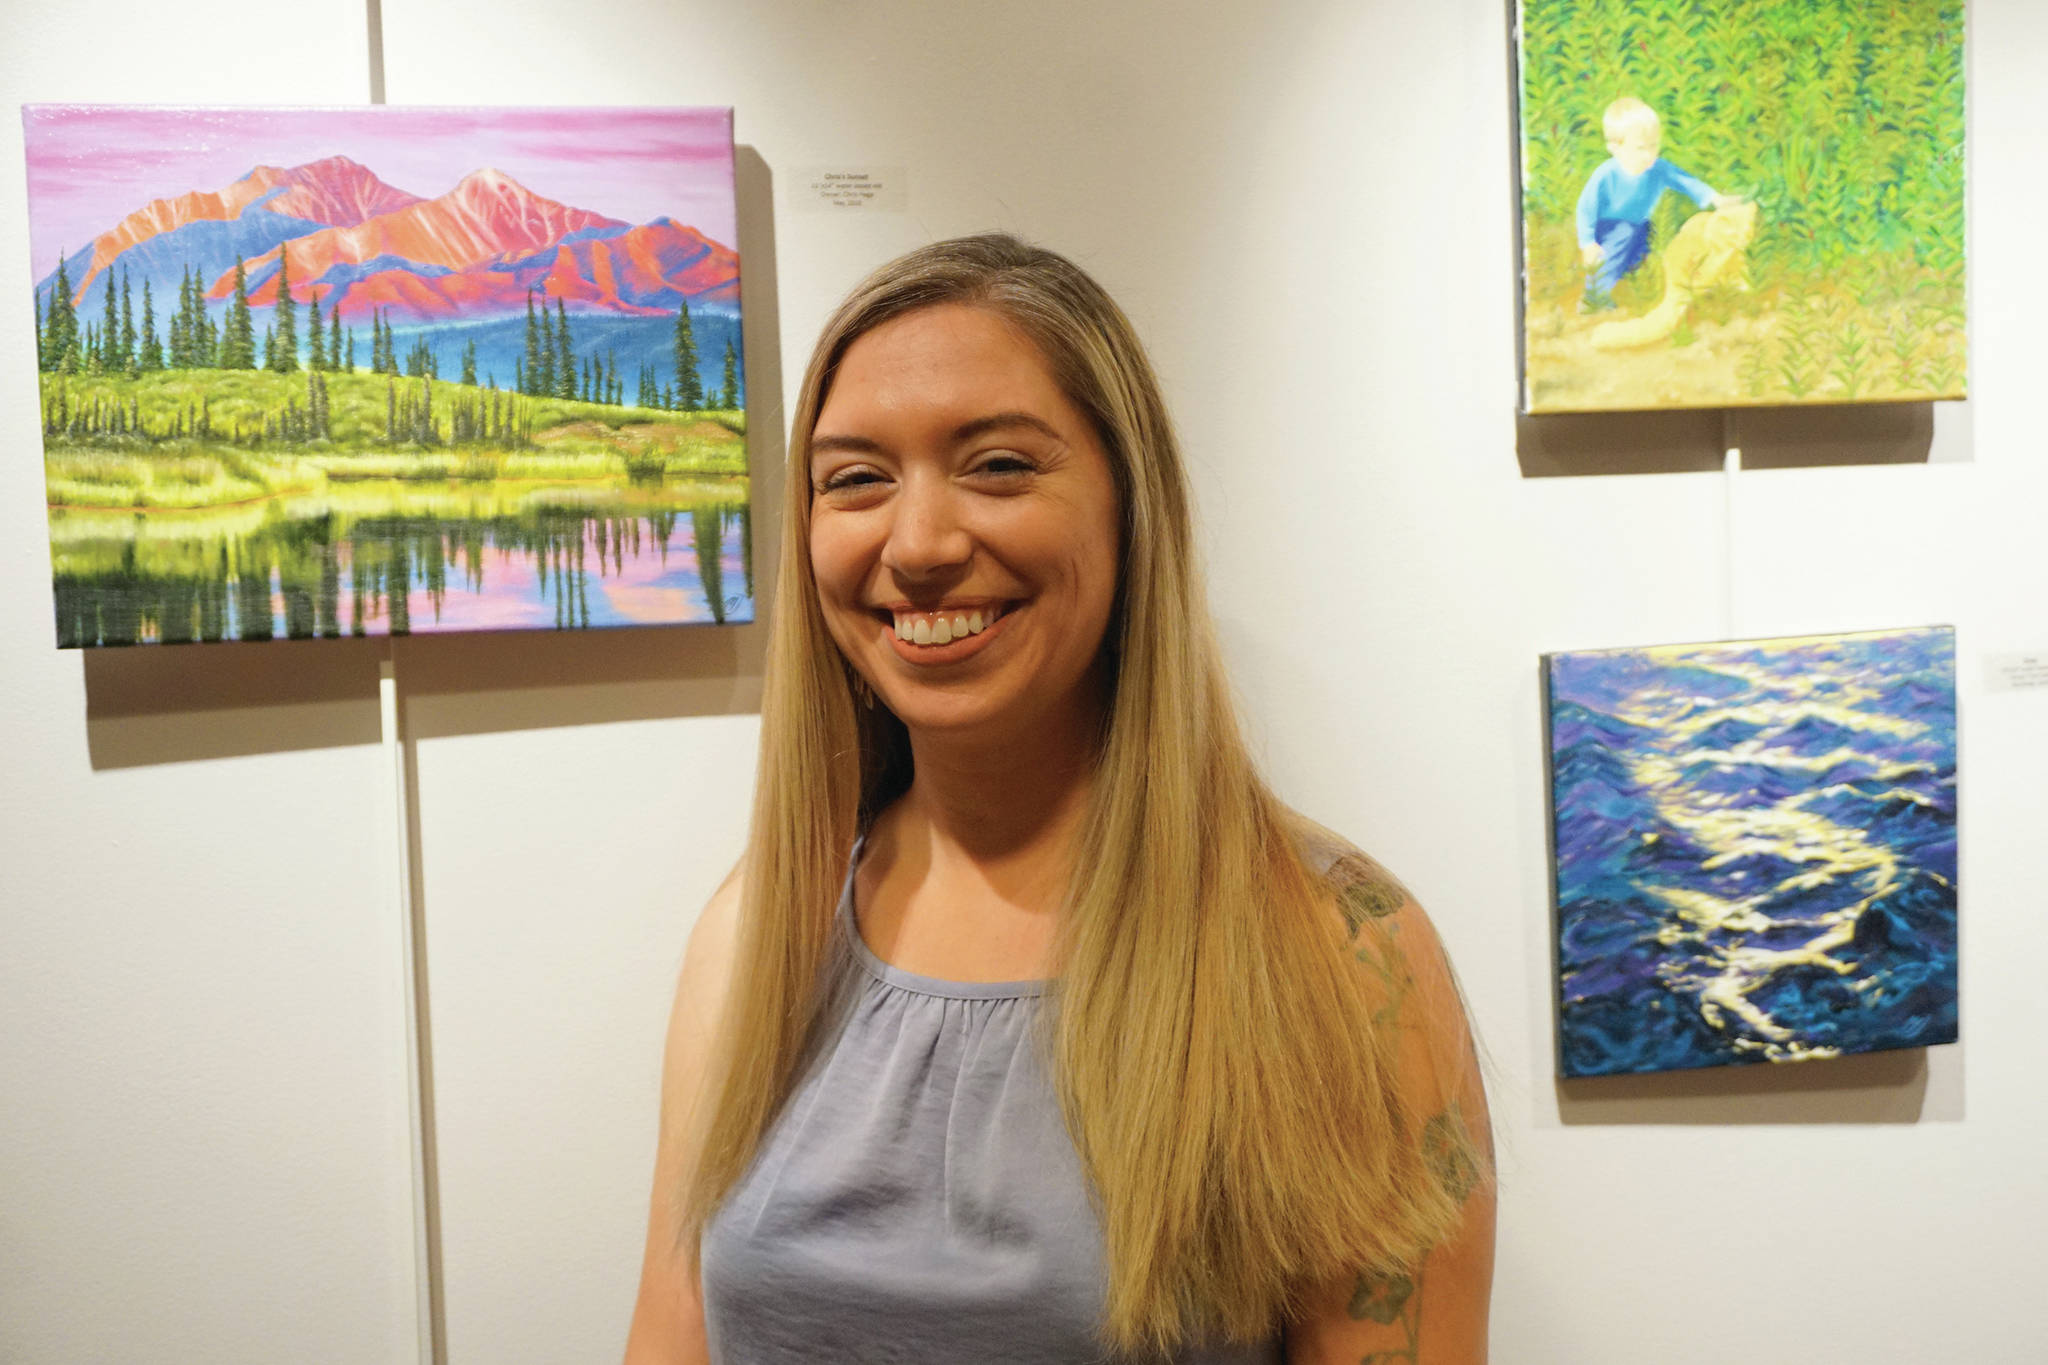 Maria Bernier poses by some of her paintings at her show at Kachemak Bay Campus that opened on First Friday, Oct. 4, 2019, in Homer, Alaska. (Photo by Michael Armstrong/Homer News)